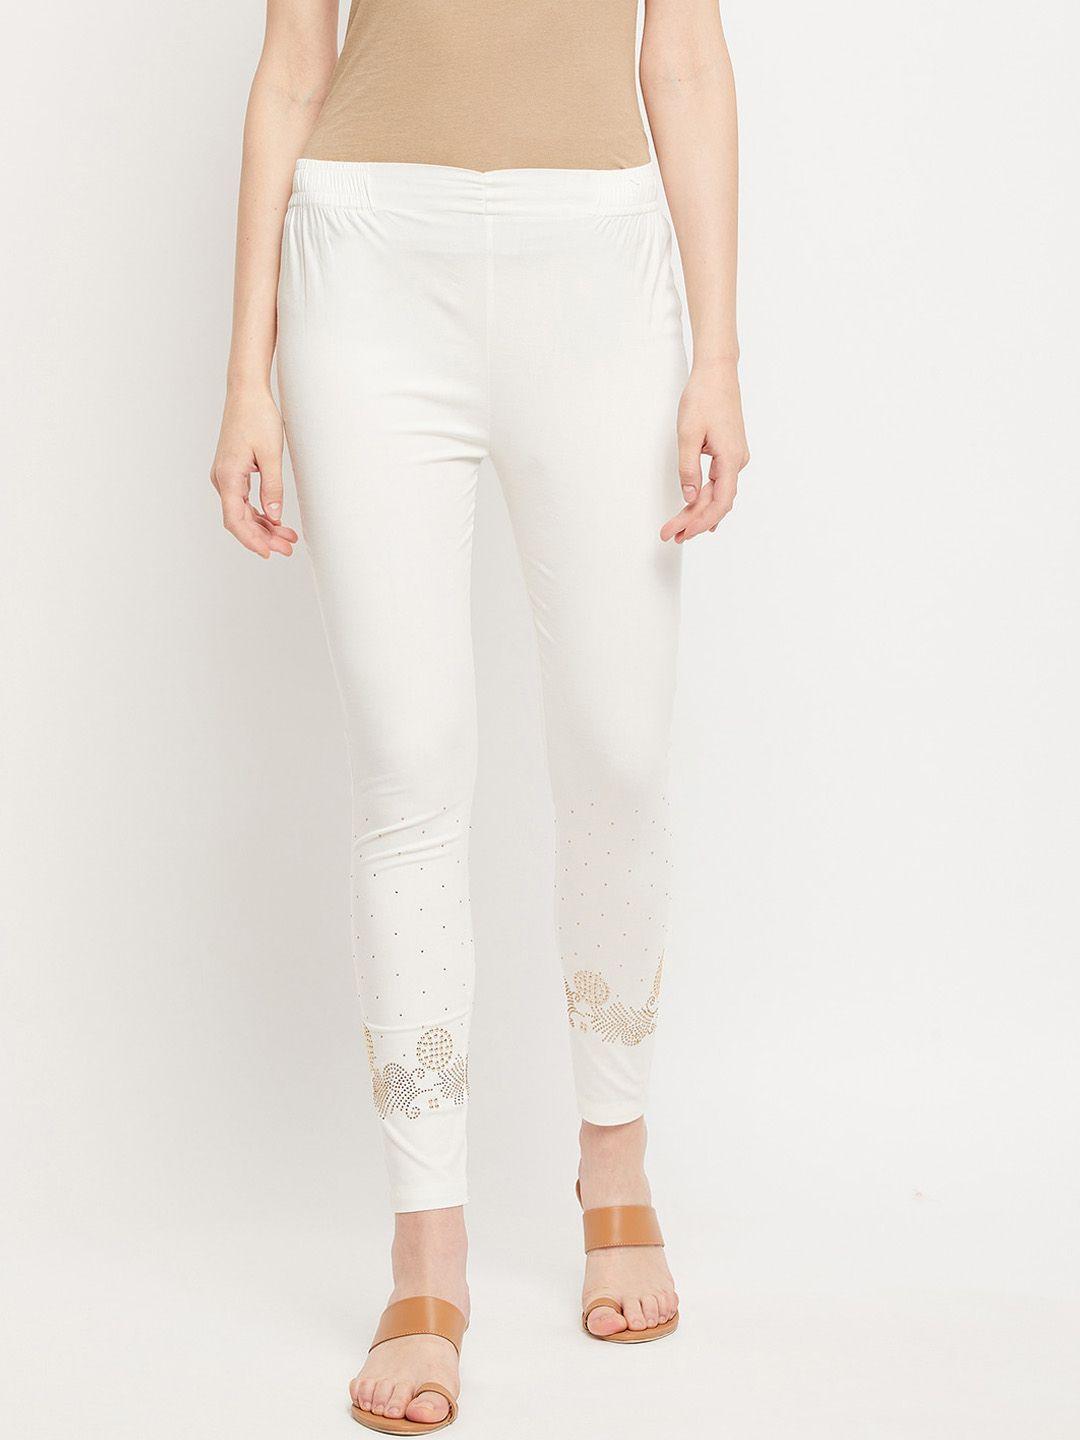 clora creation women embellished cigarette trousers